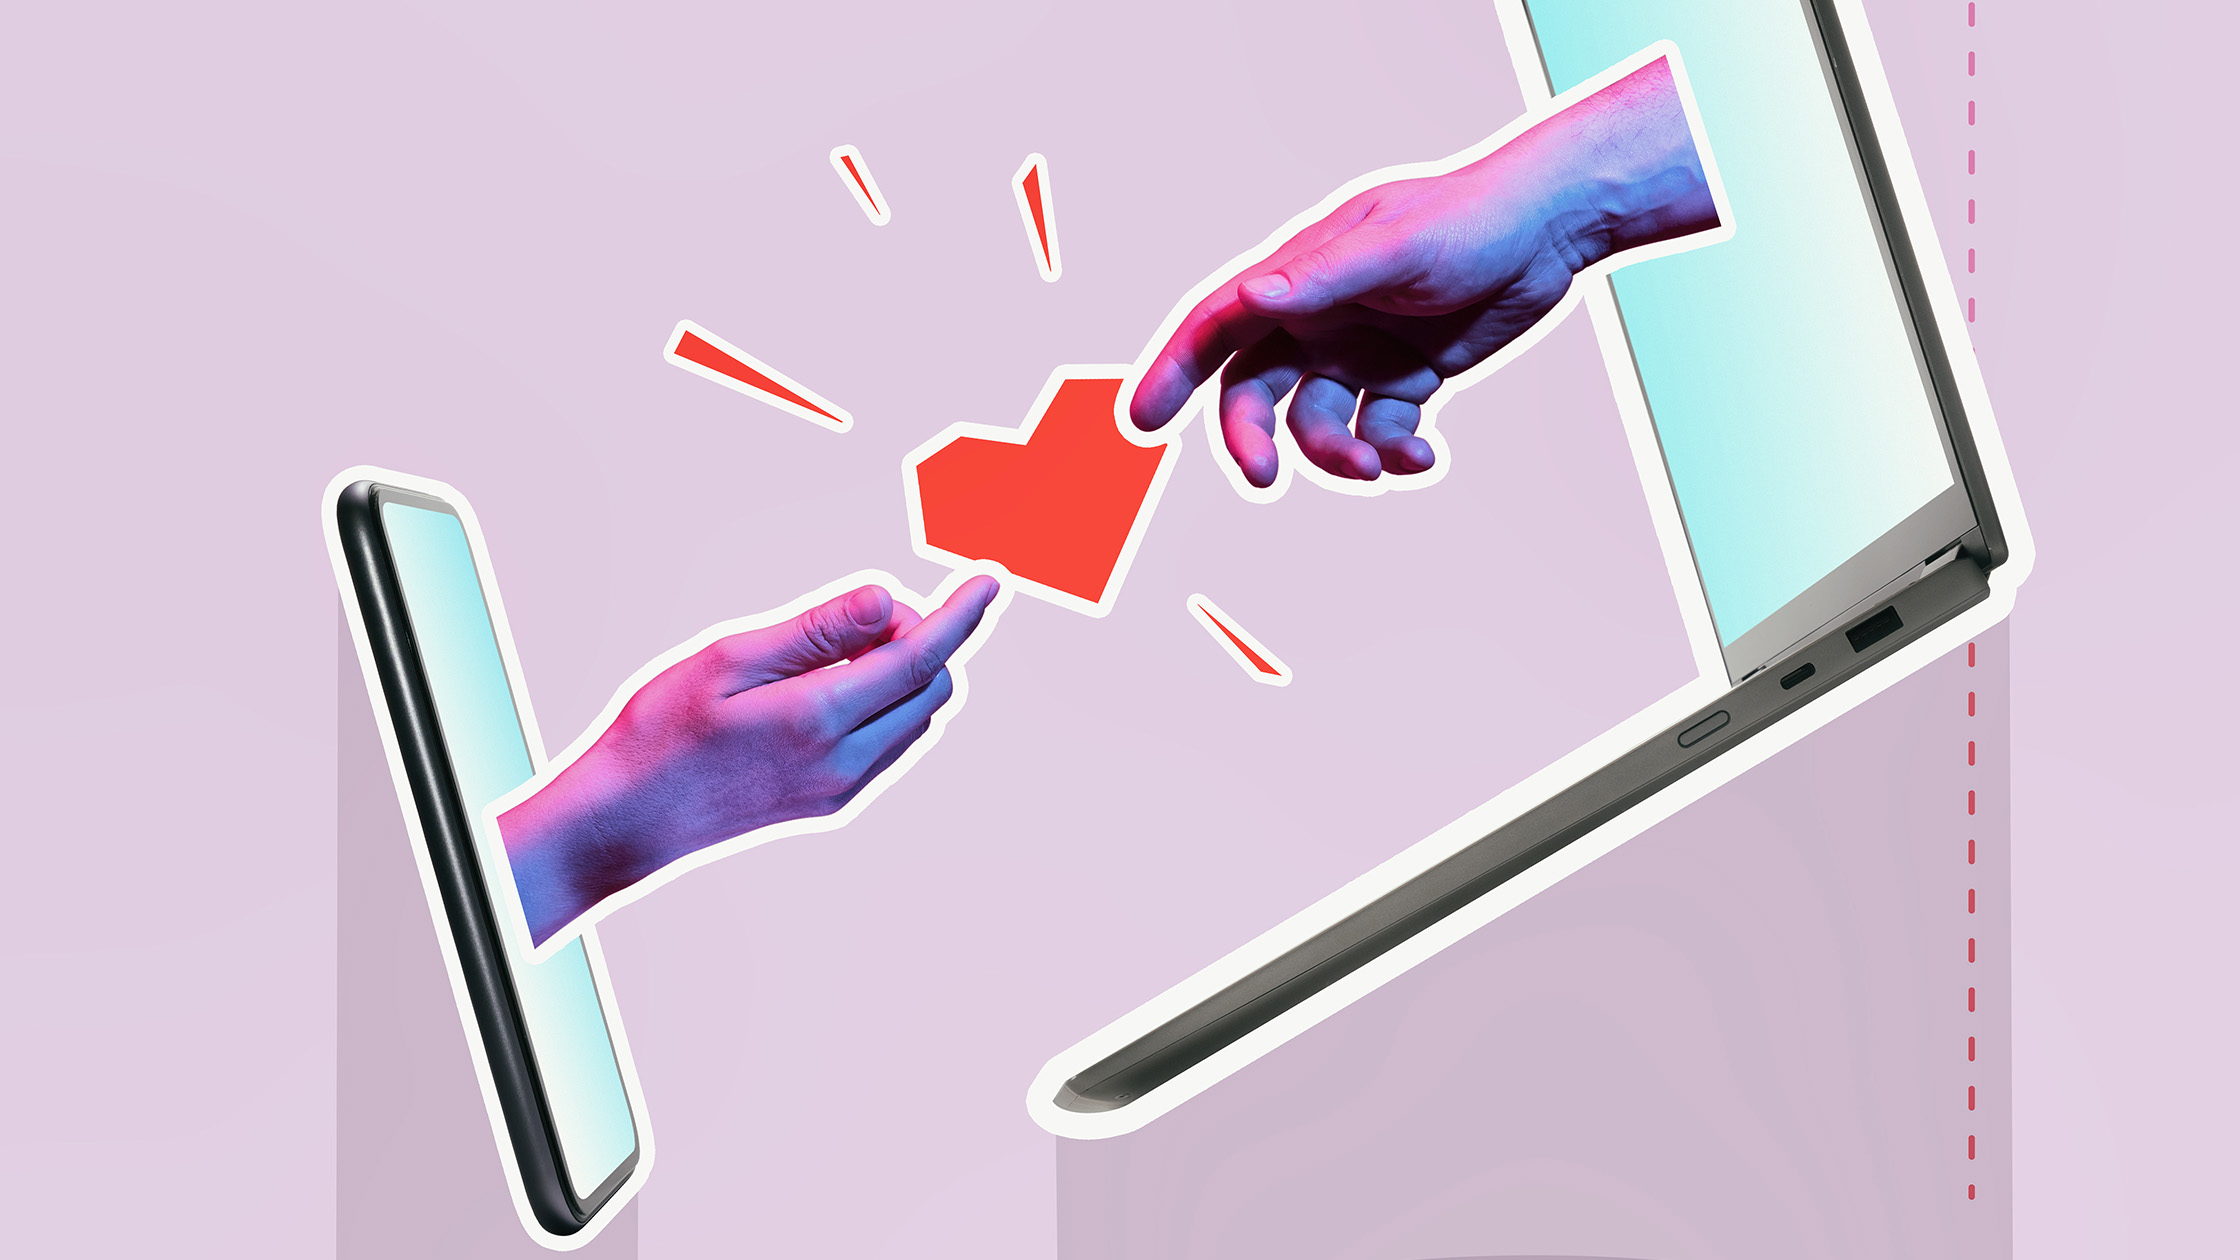 Two cartoonized hands reach out of the face of a cell phone to touch a heart together